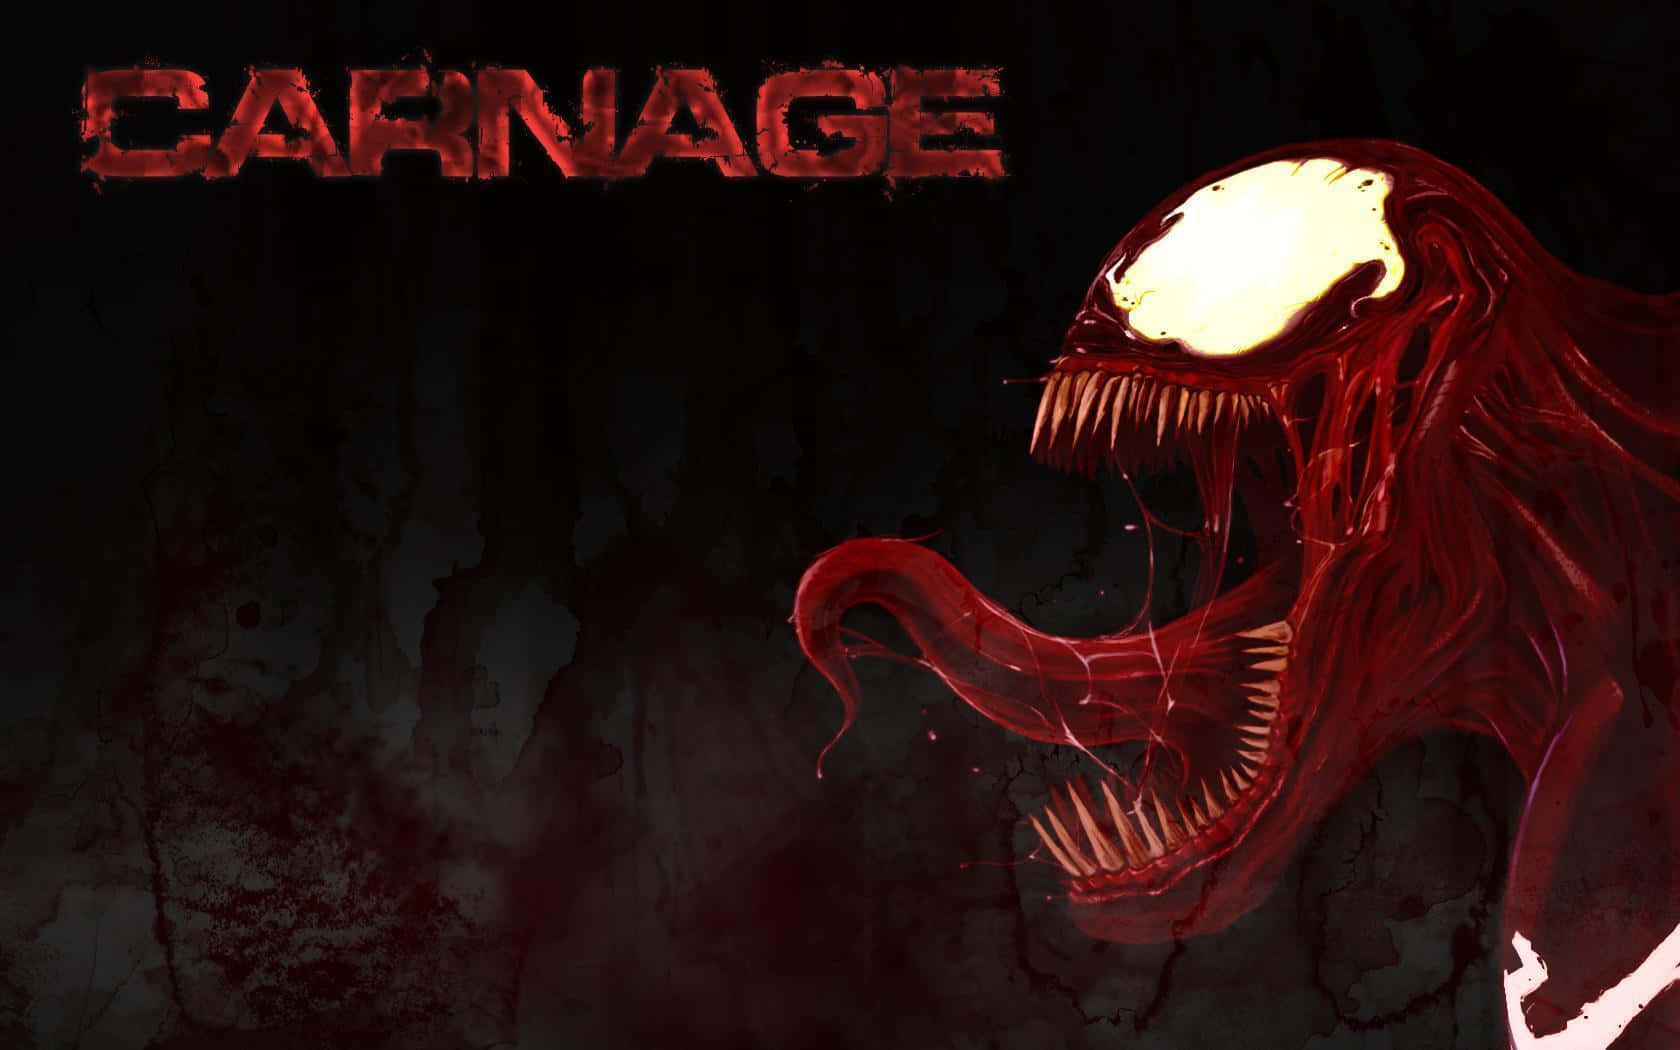 Carnage Unleashed - A fearsome comic book villain erupts with intensity and chaos